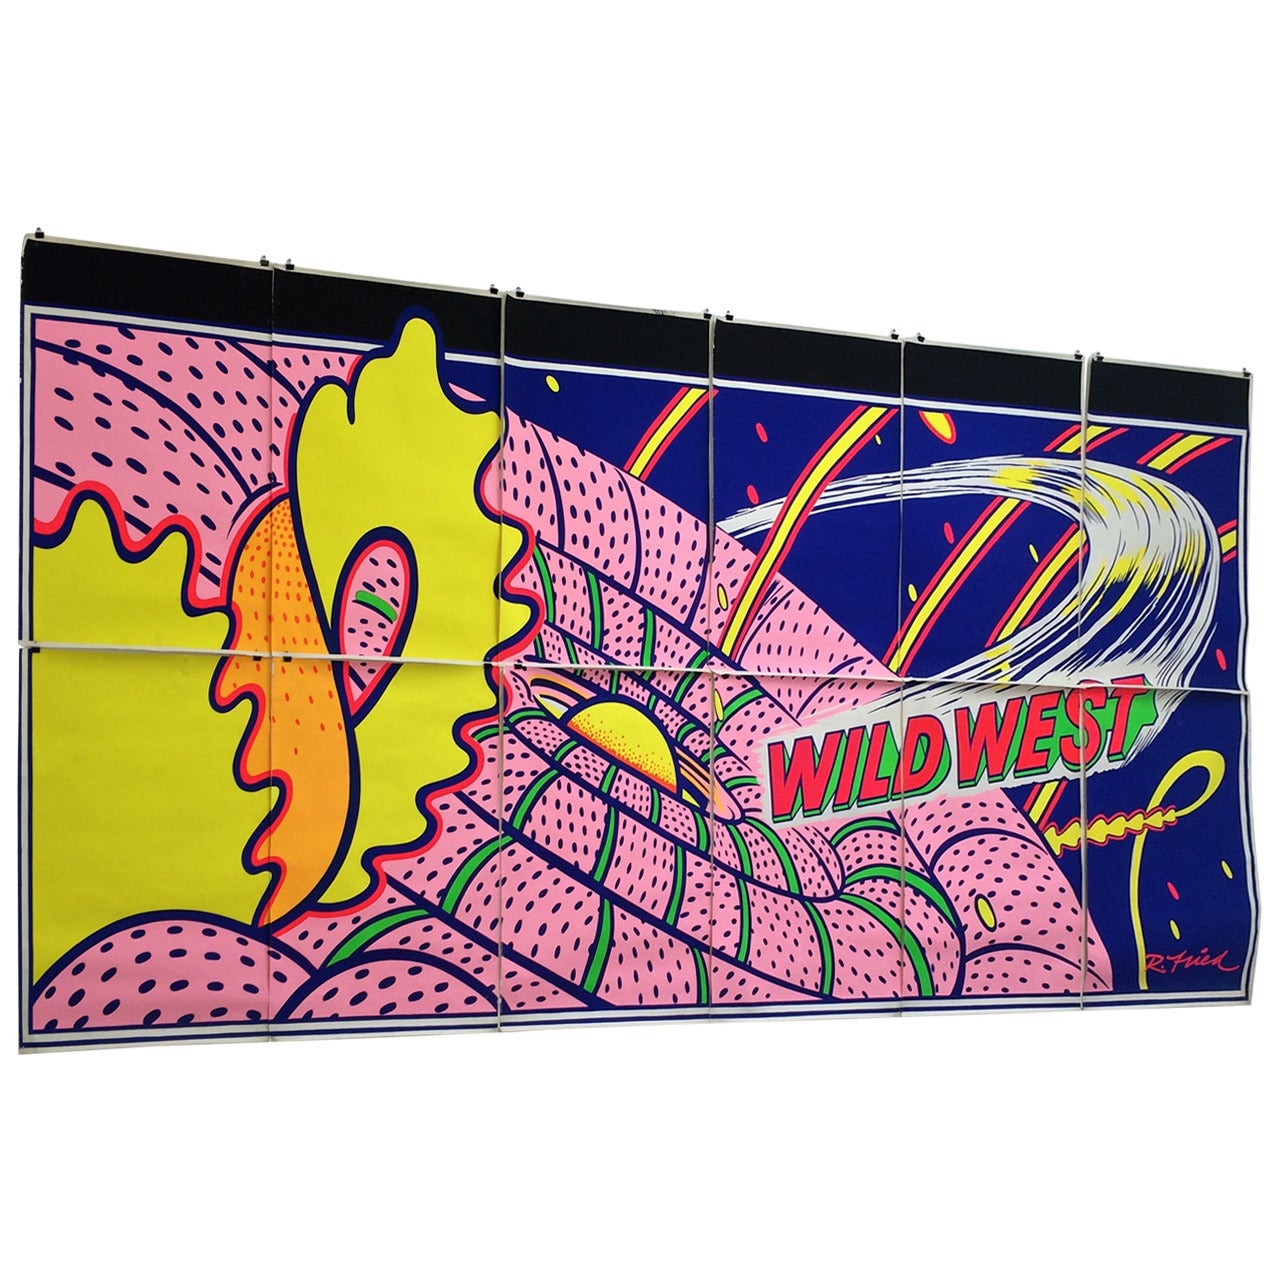 Monumental, Hand-Stenciled 1960s Psychedelic Rock Billboard by Robert Fried For Sale